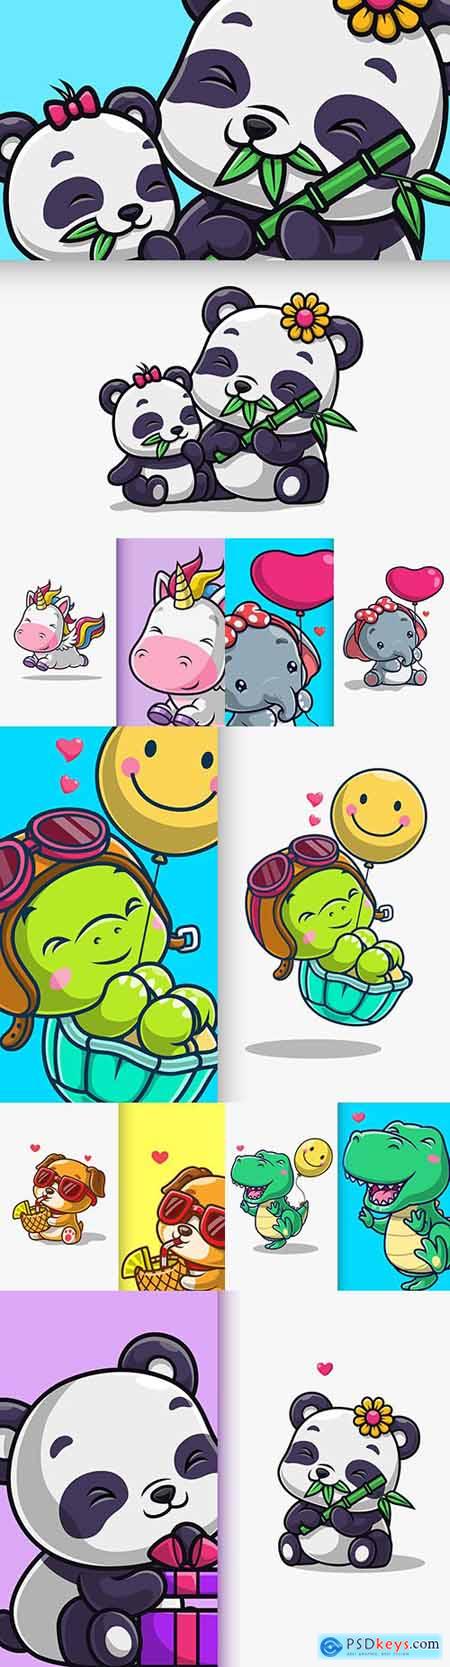 Cute Animals Mascot and Background Cartoon Character Illustration